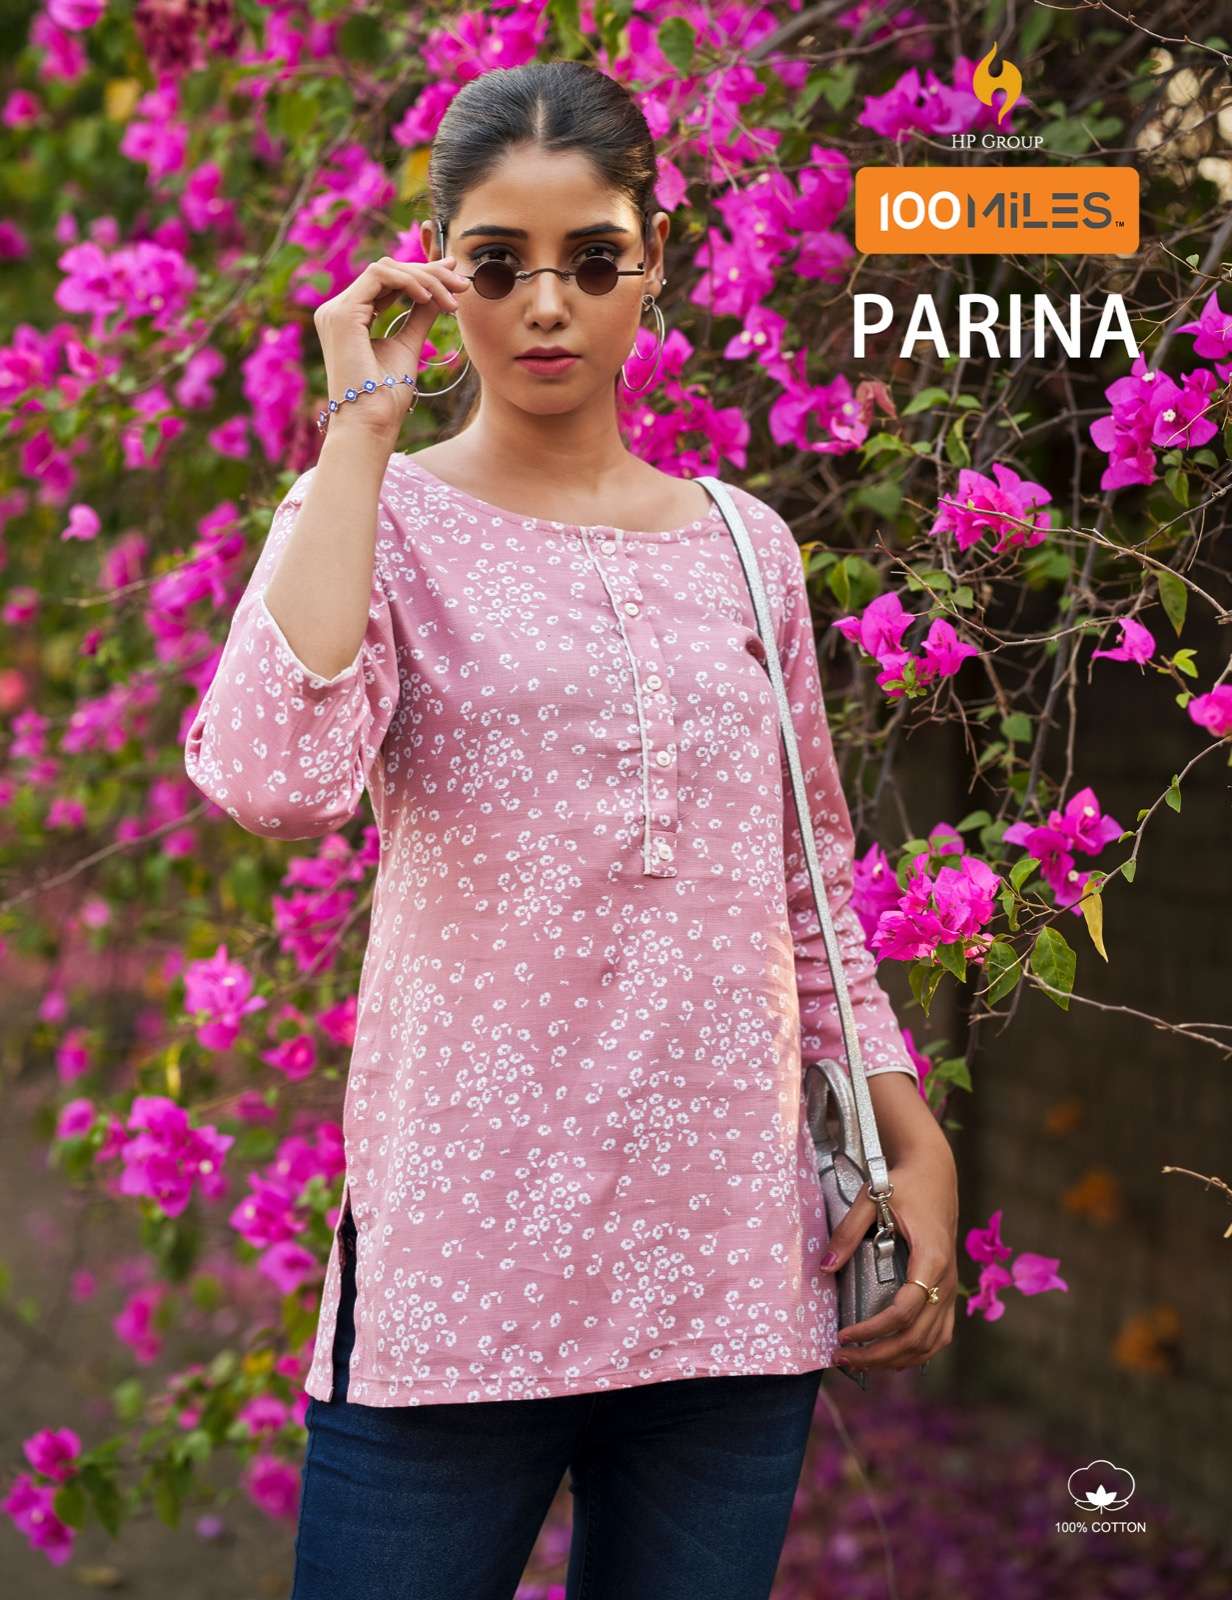 parina by 100 miles pure cotton casual short tops 